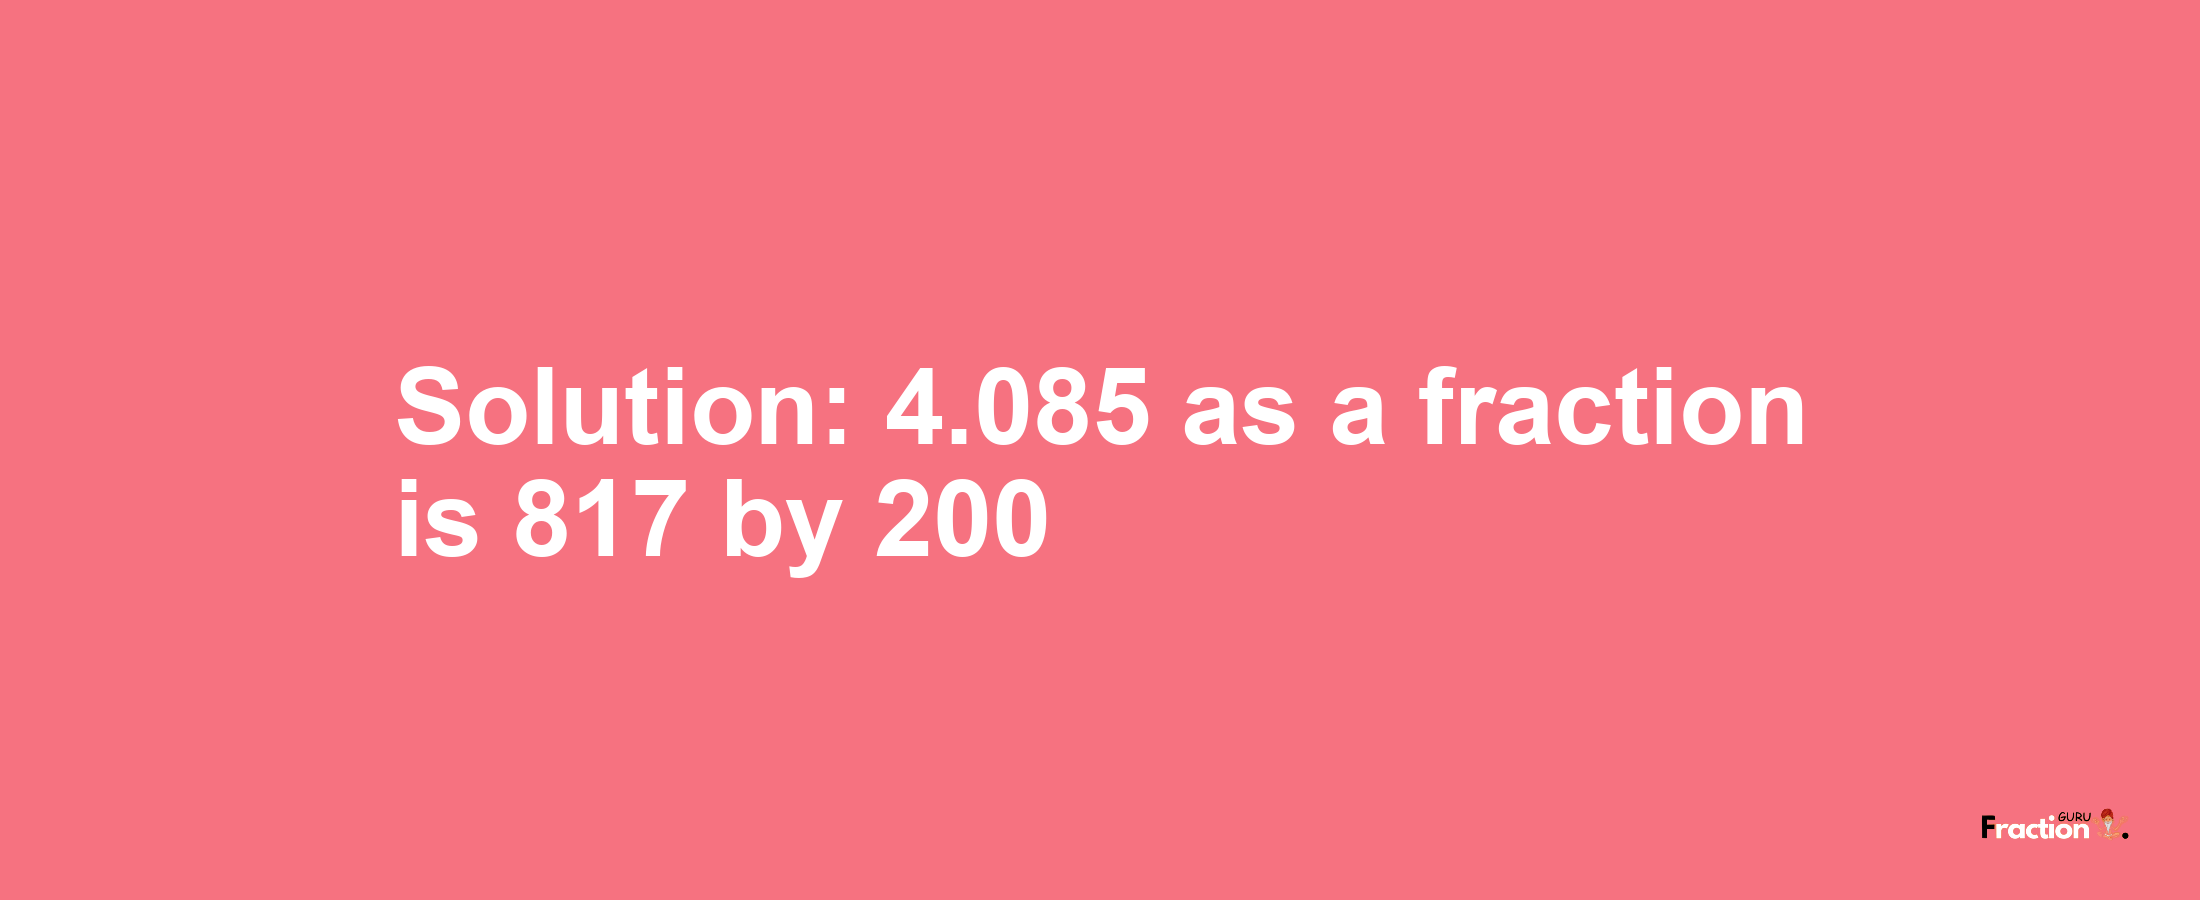 Solution:4.085 as a fraction is 817/200